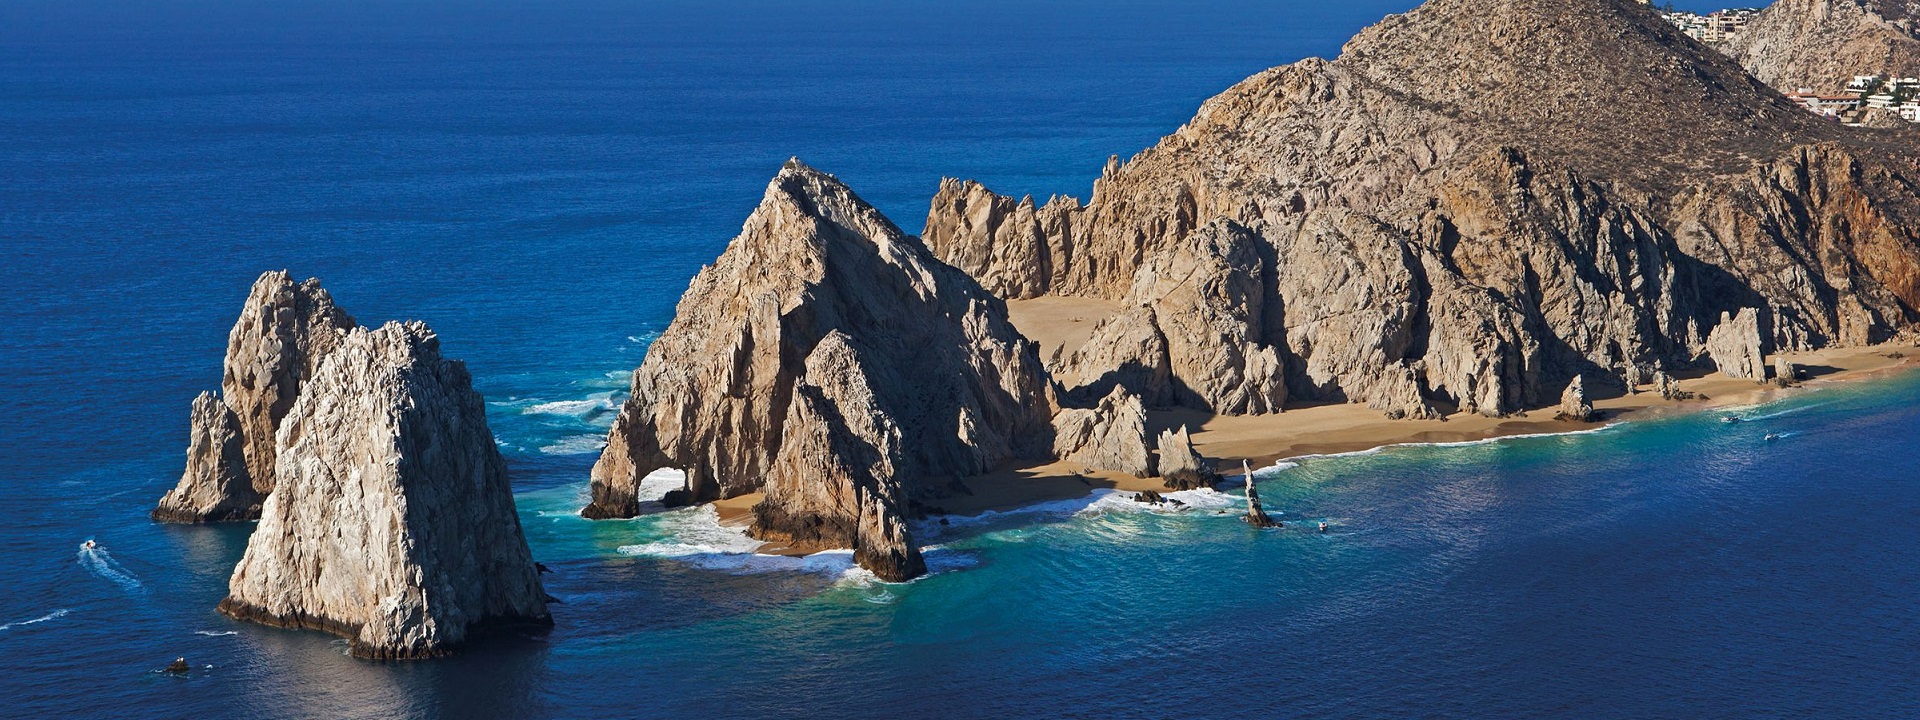 a rocky island in the middle of a body of water with Arch of Cabo San Lucas in the background